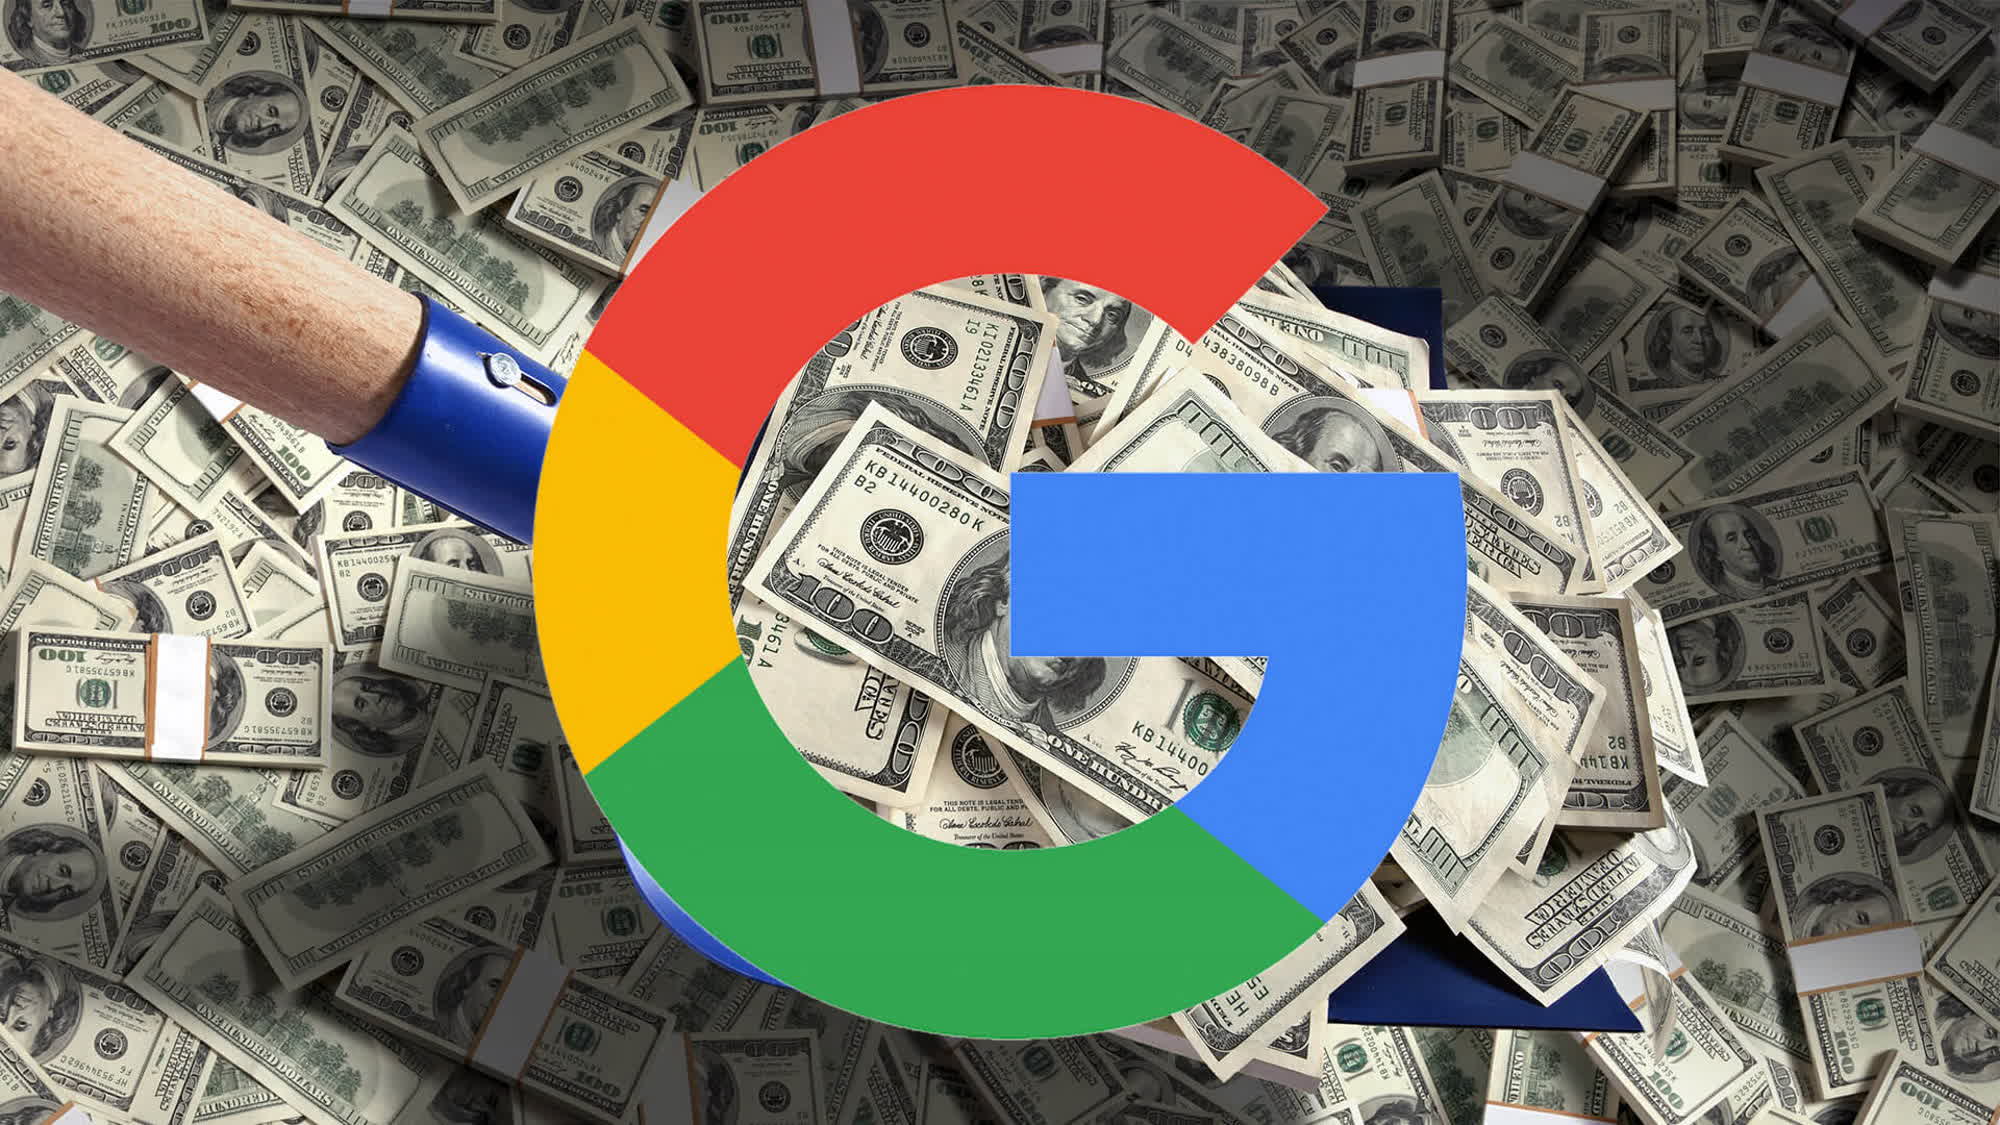 AI-based search would be considerably more expensive per query for Google